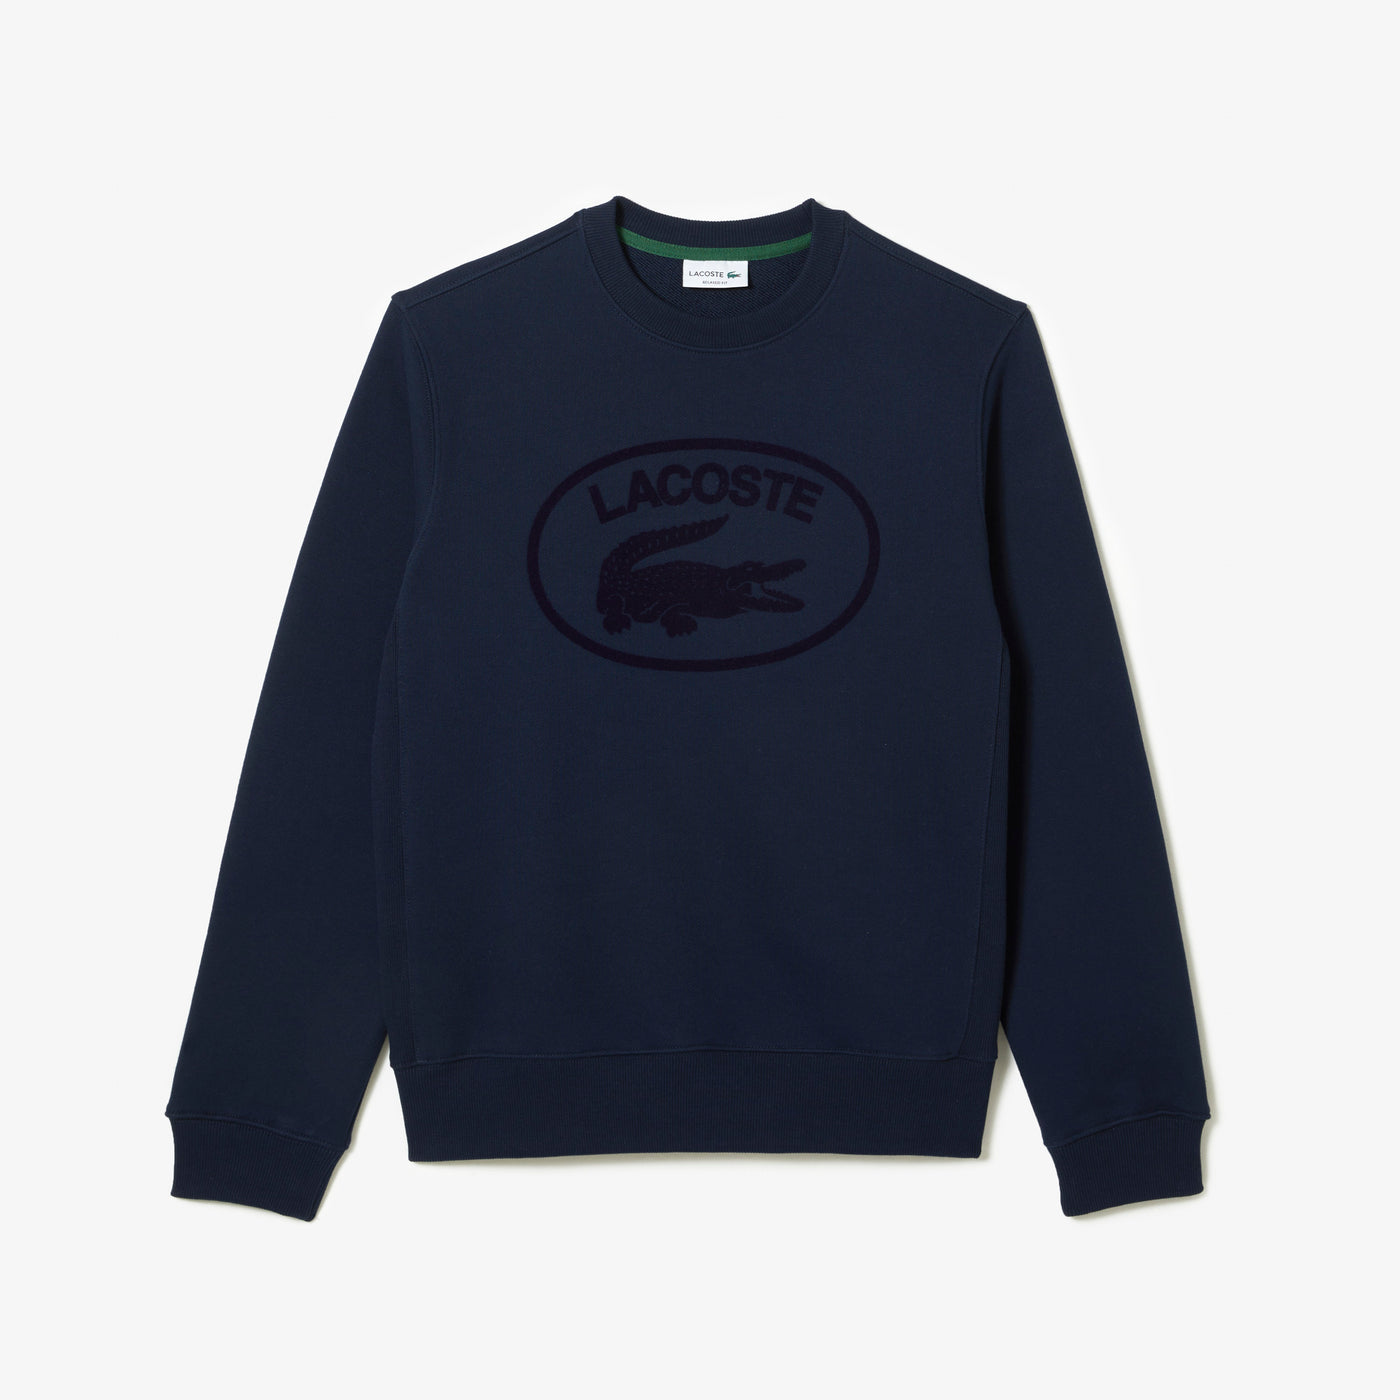 Shop The Latest Collection Of Lacoste Men'S Lacoste Relaxed Fit Organic Cotton Sweatshirt - Sh0254 In Lebanon